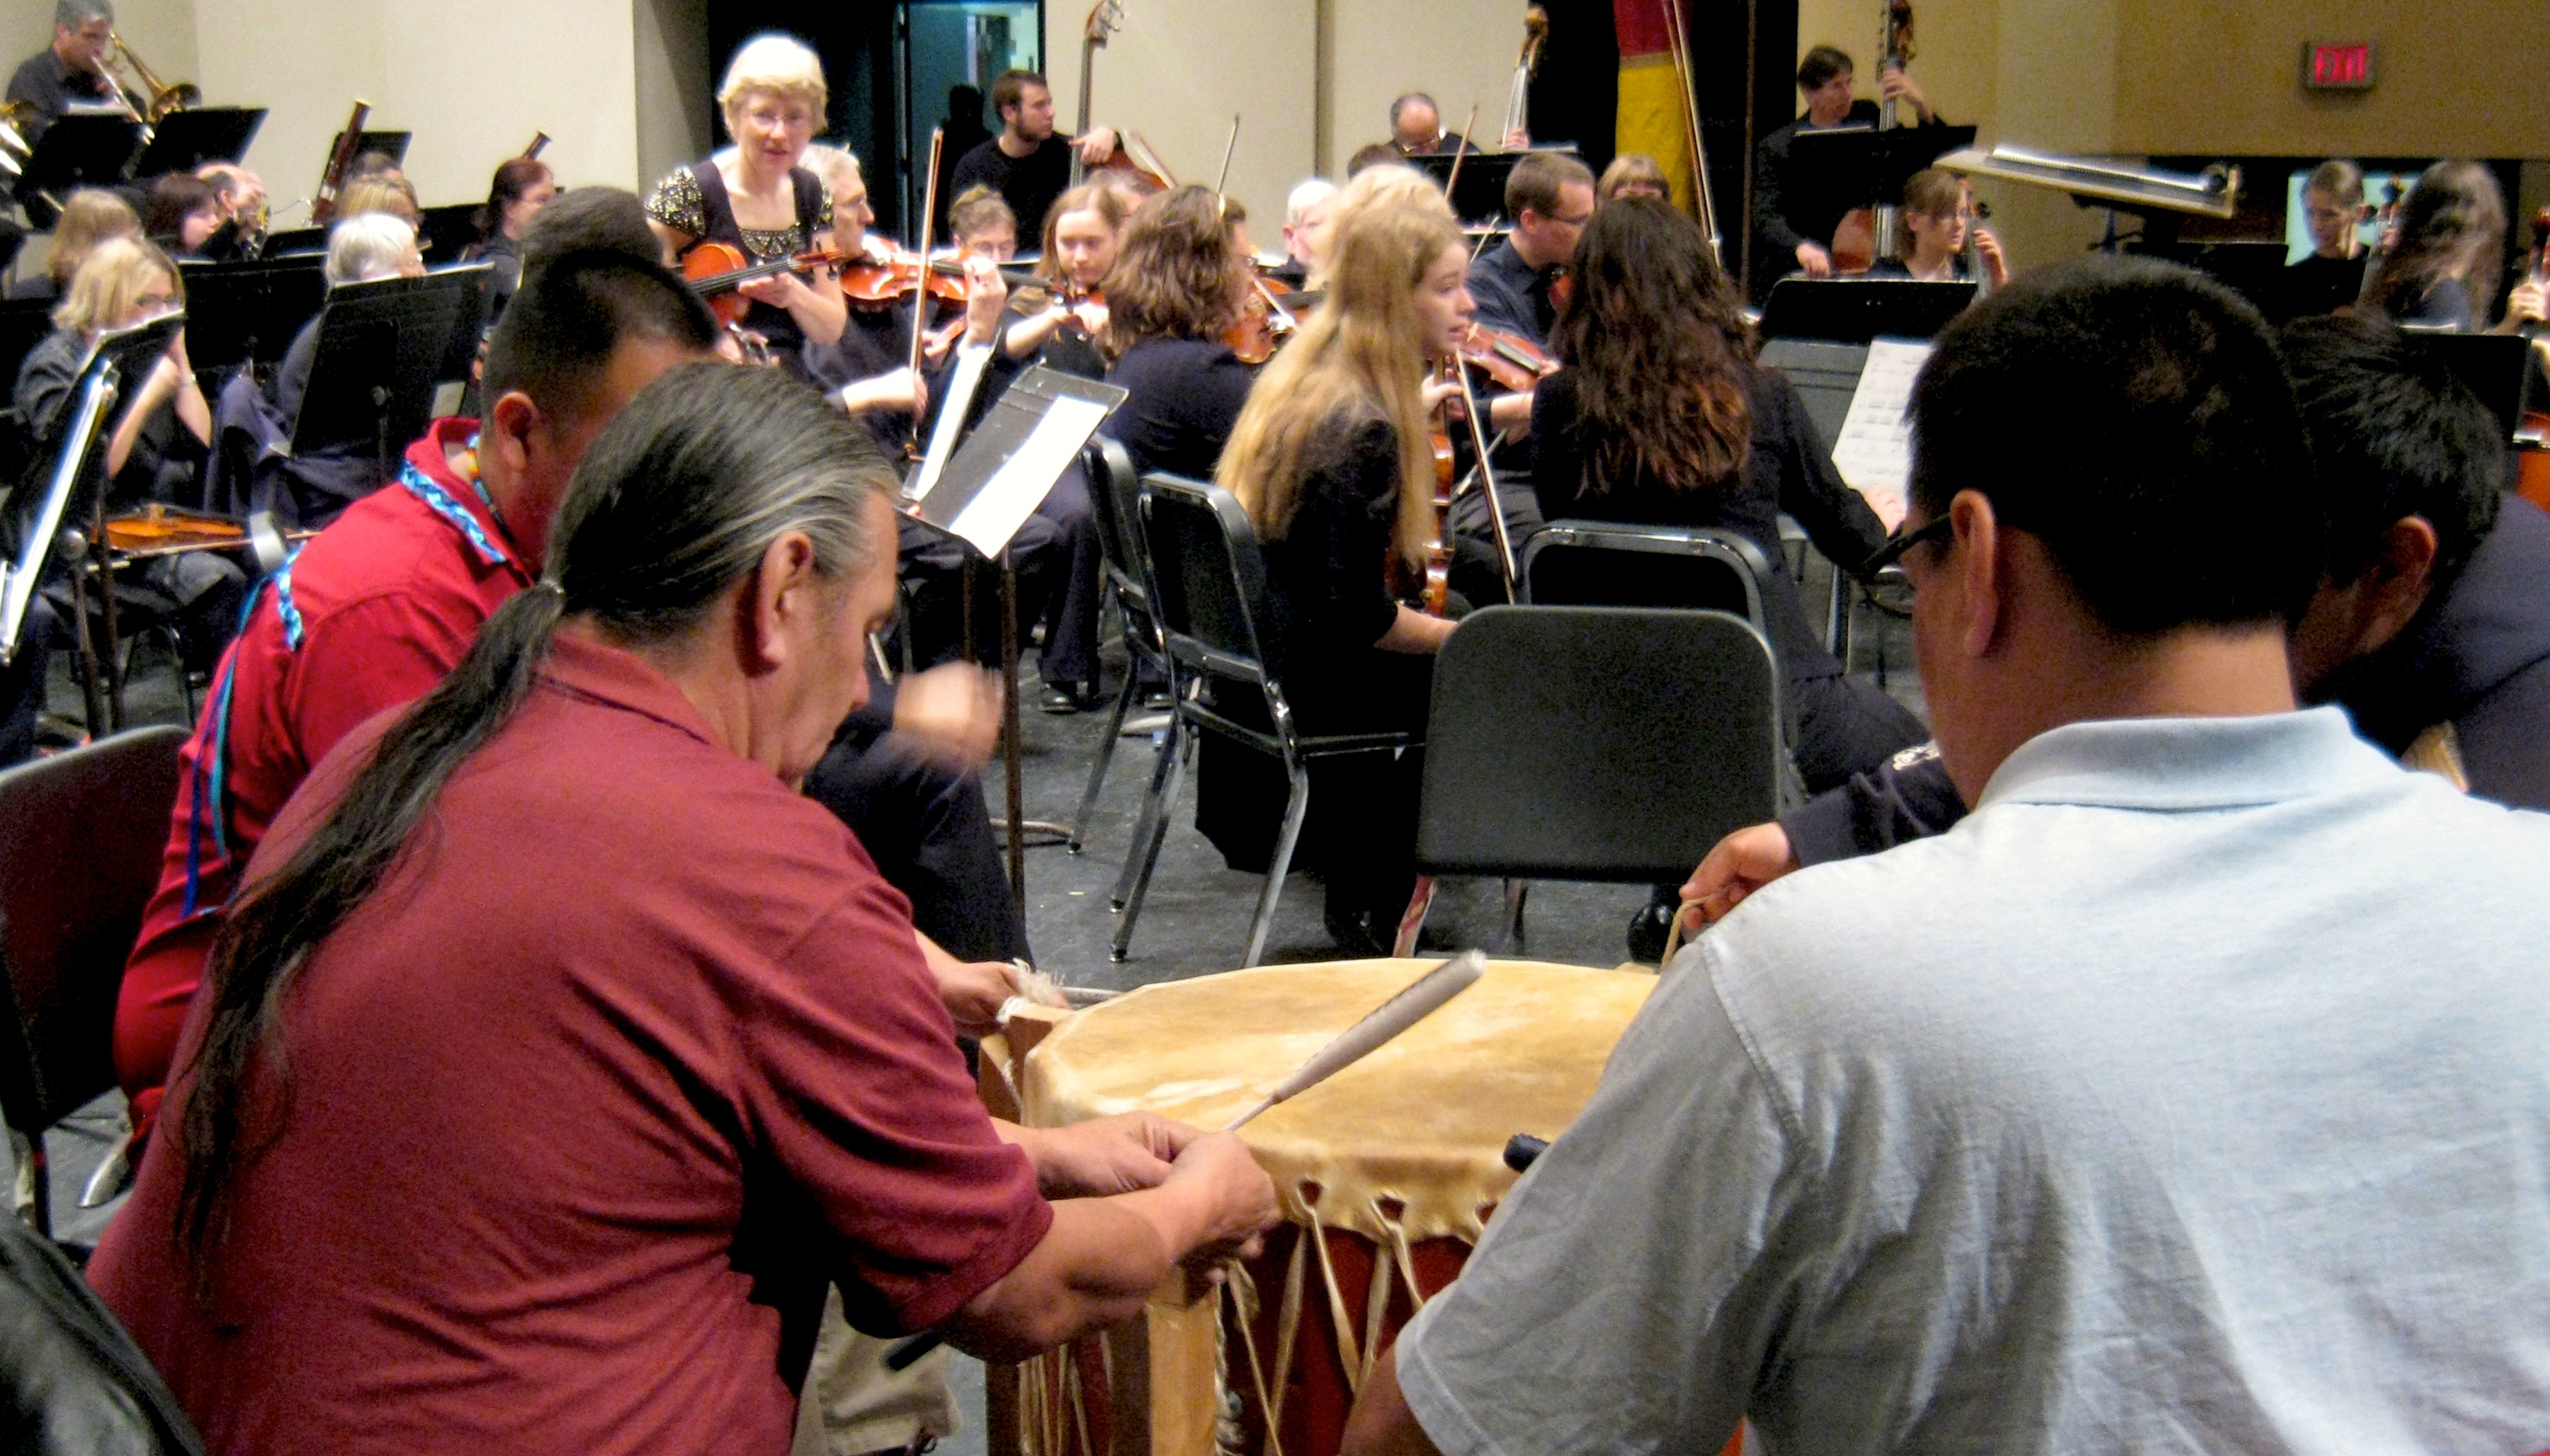 Two Native American drummers rehearsing with the members of a symphony orchestra